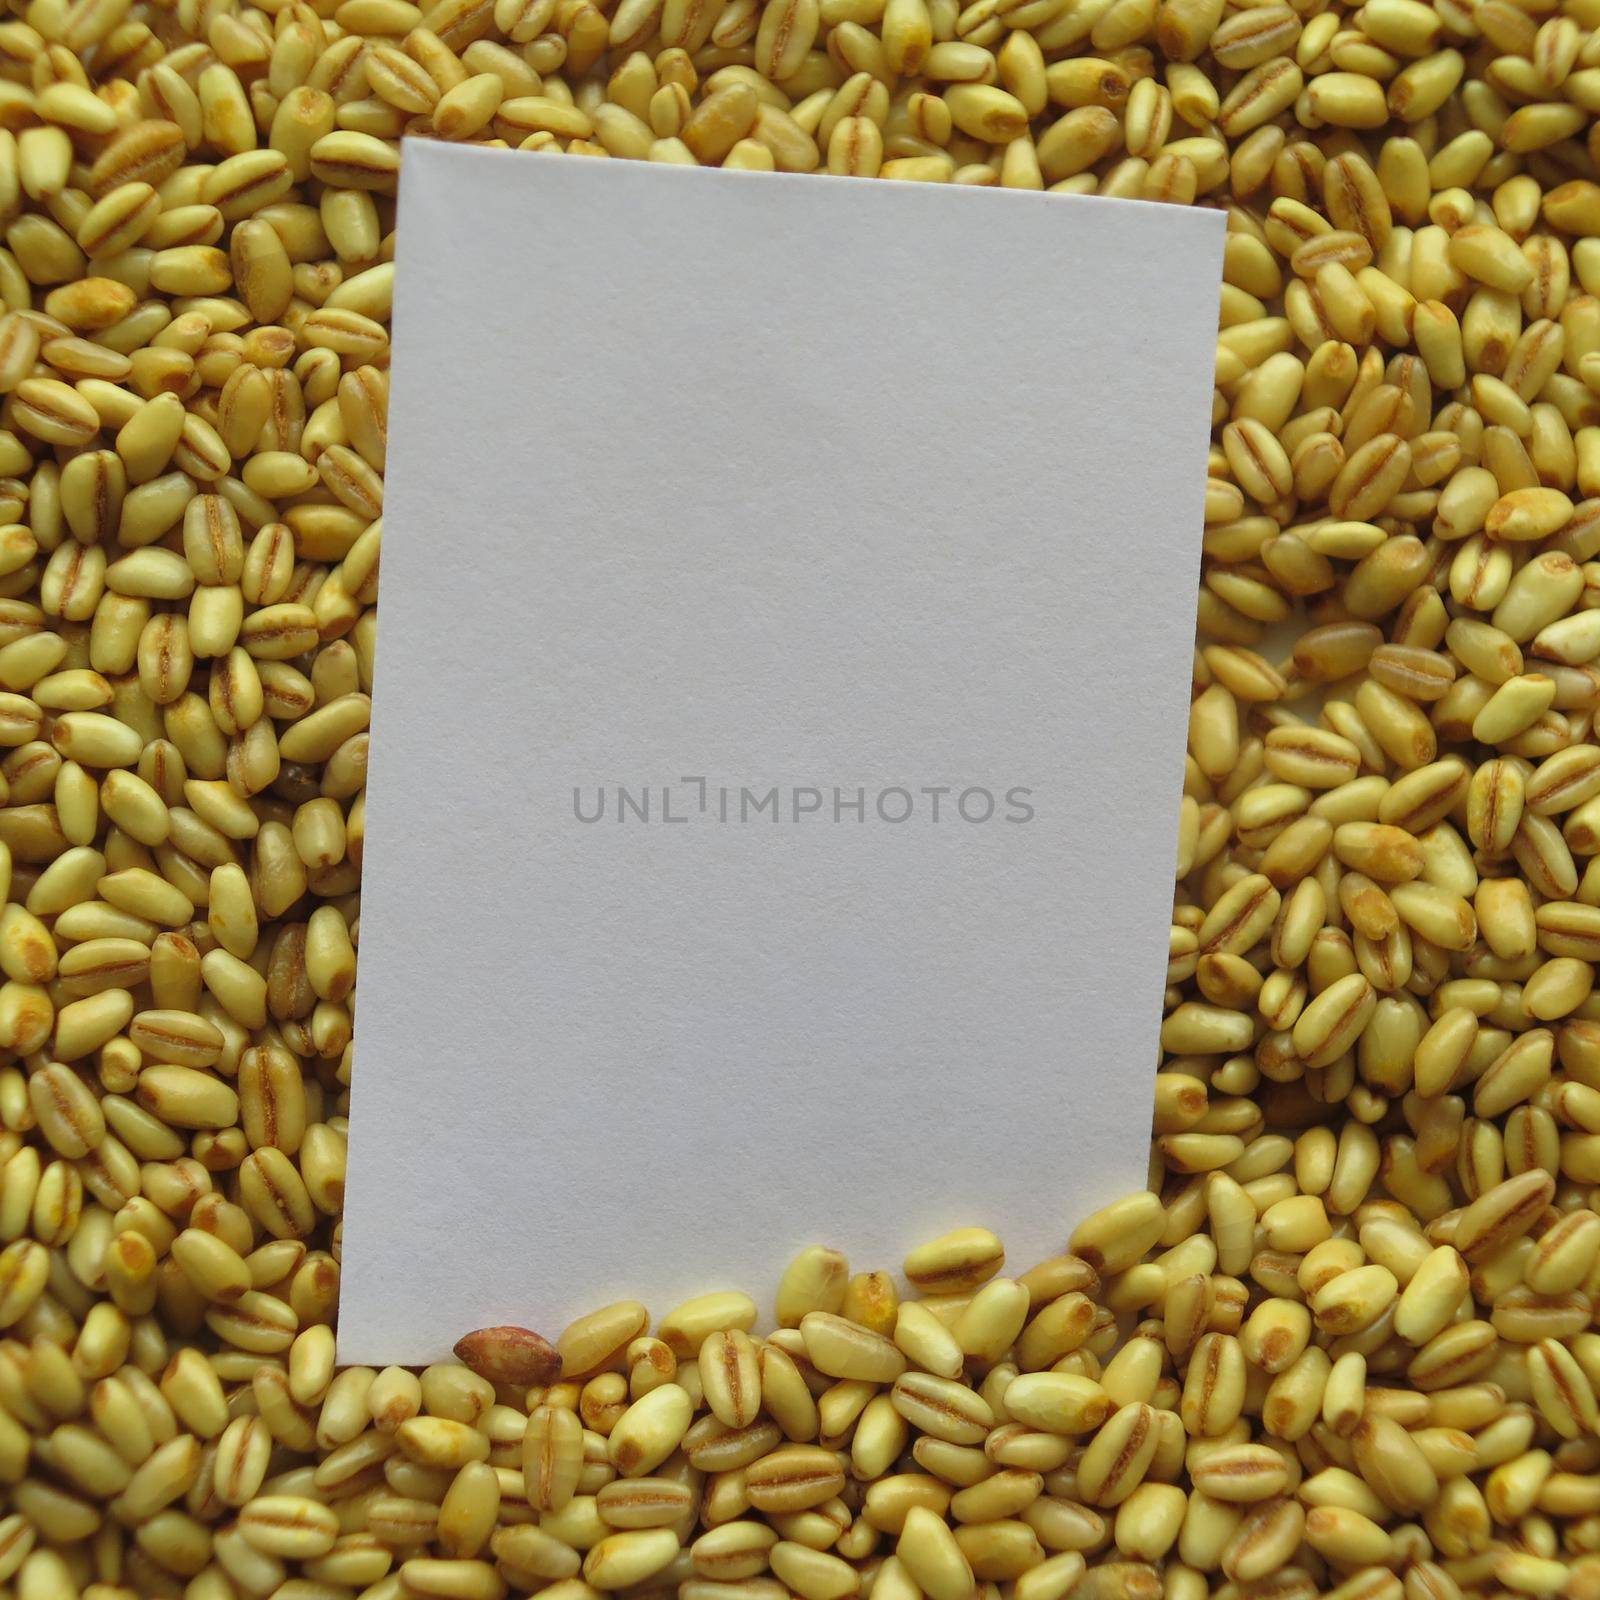 White tag on Heap of raw wheat background